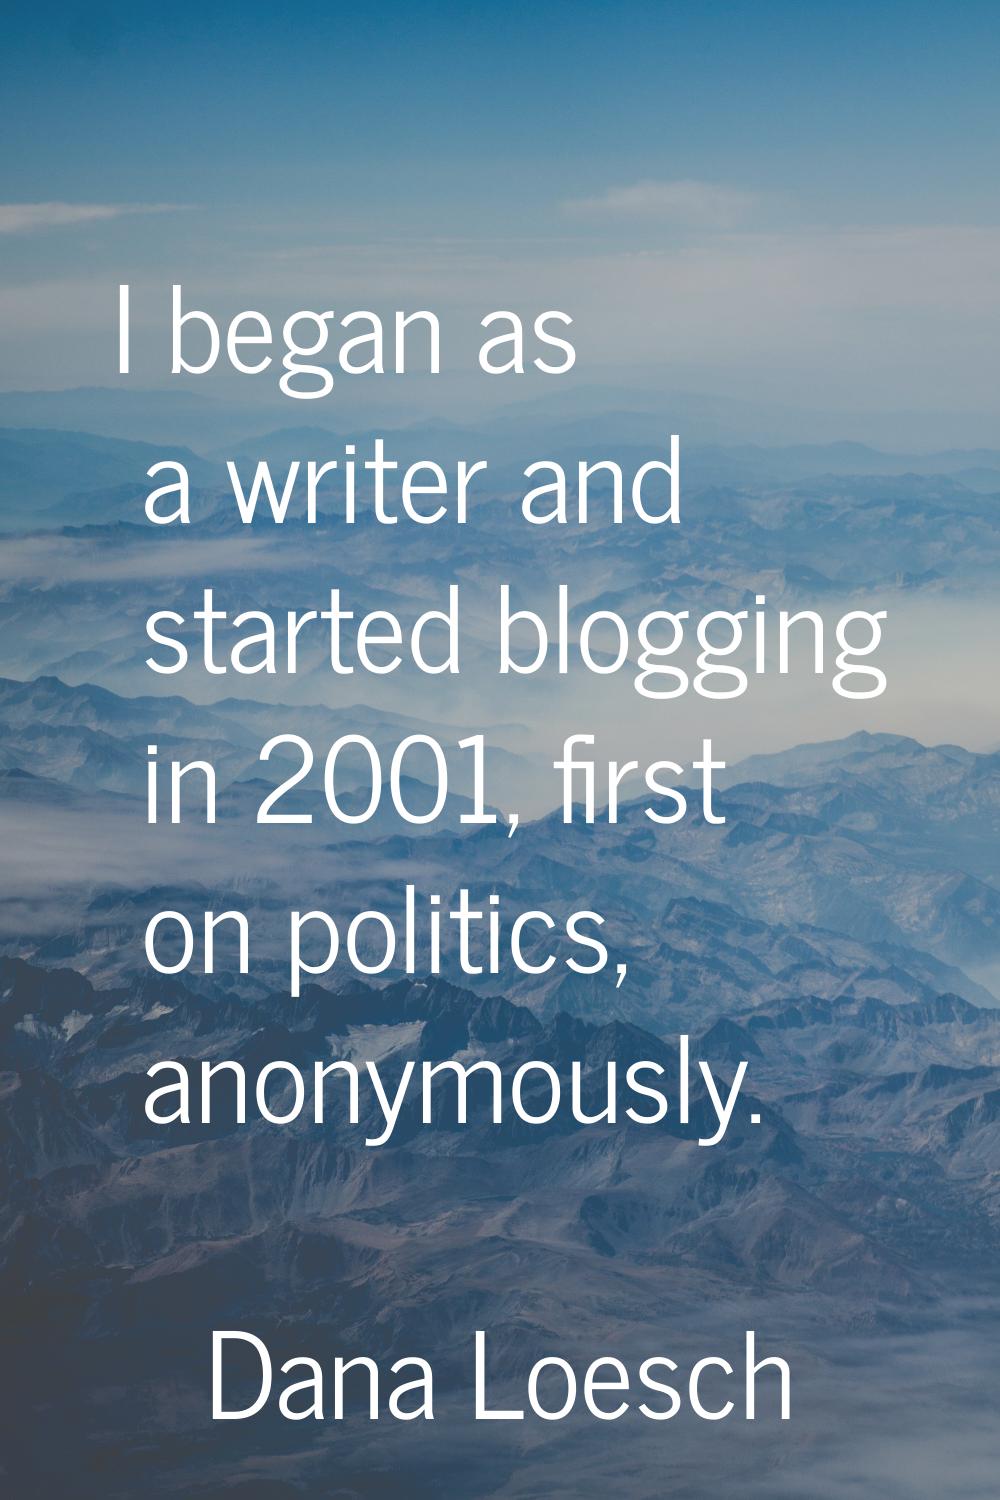 I began as a writer and started blogging in 2001, first on politics, anonymously.